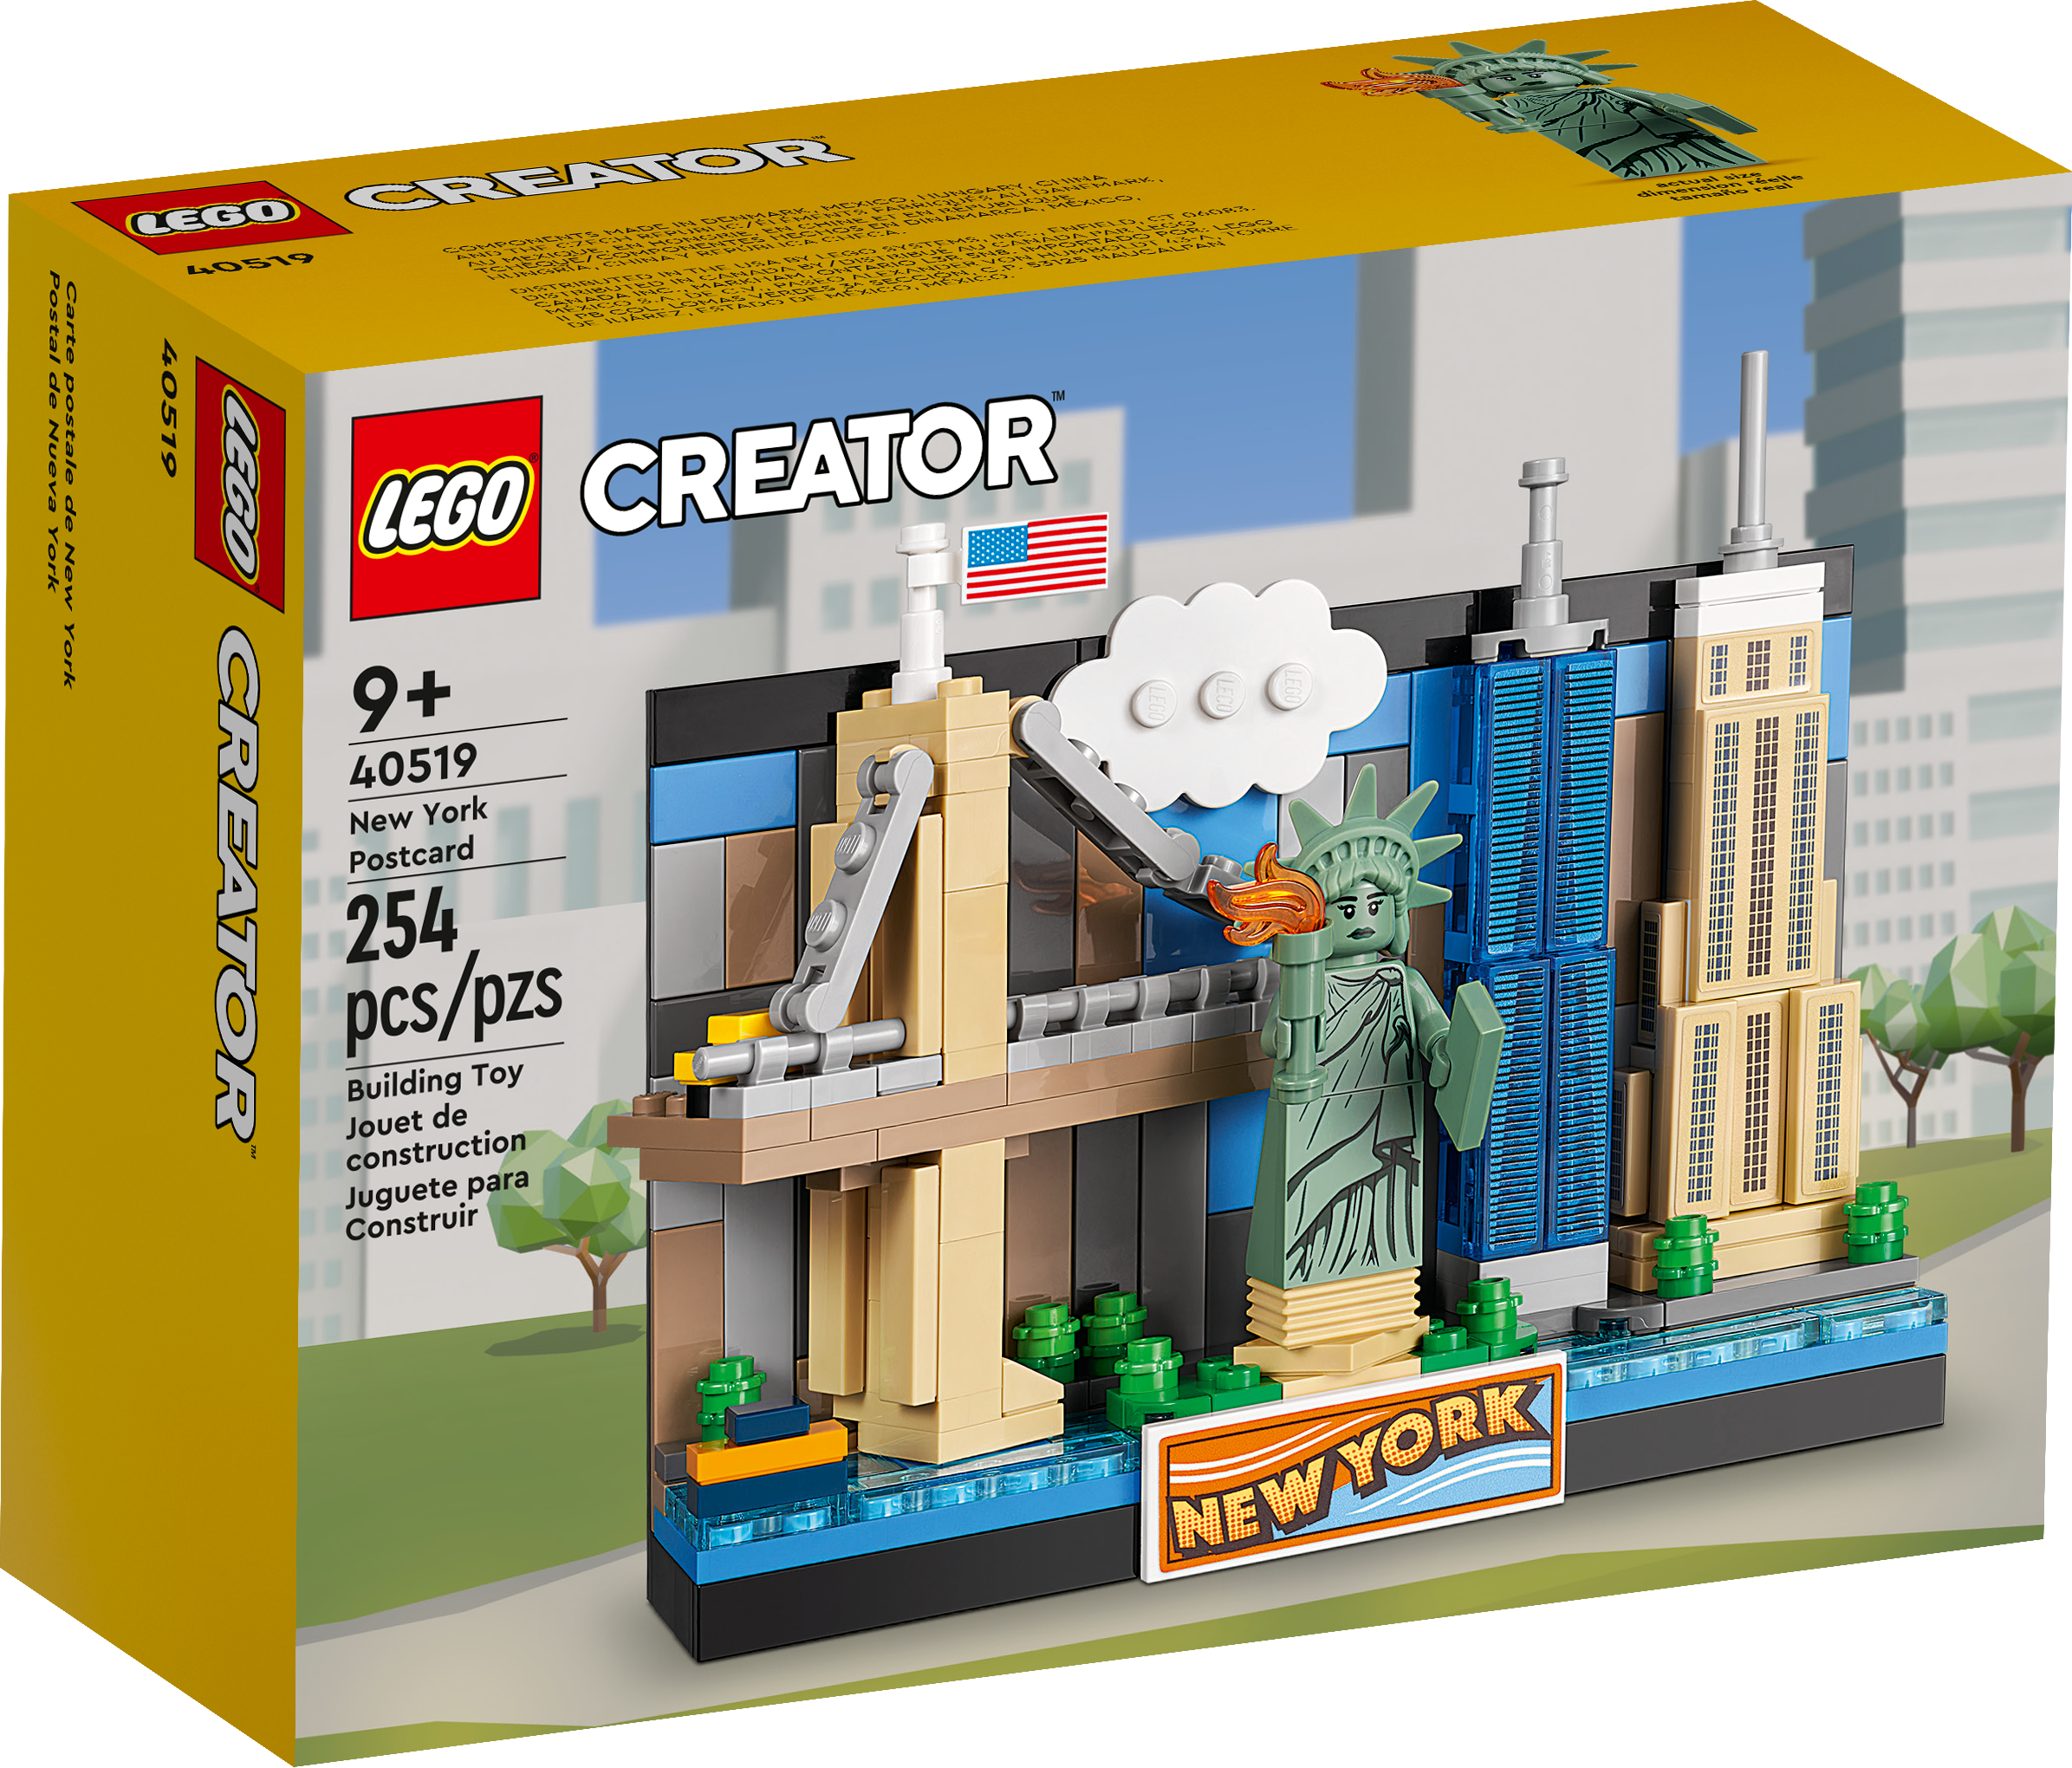 New York Postcard | Other | Buy online at the Official LEGO® Shop US